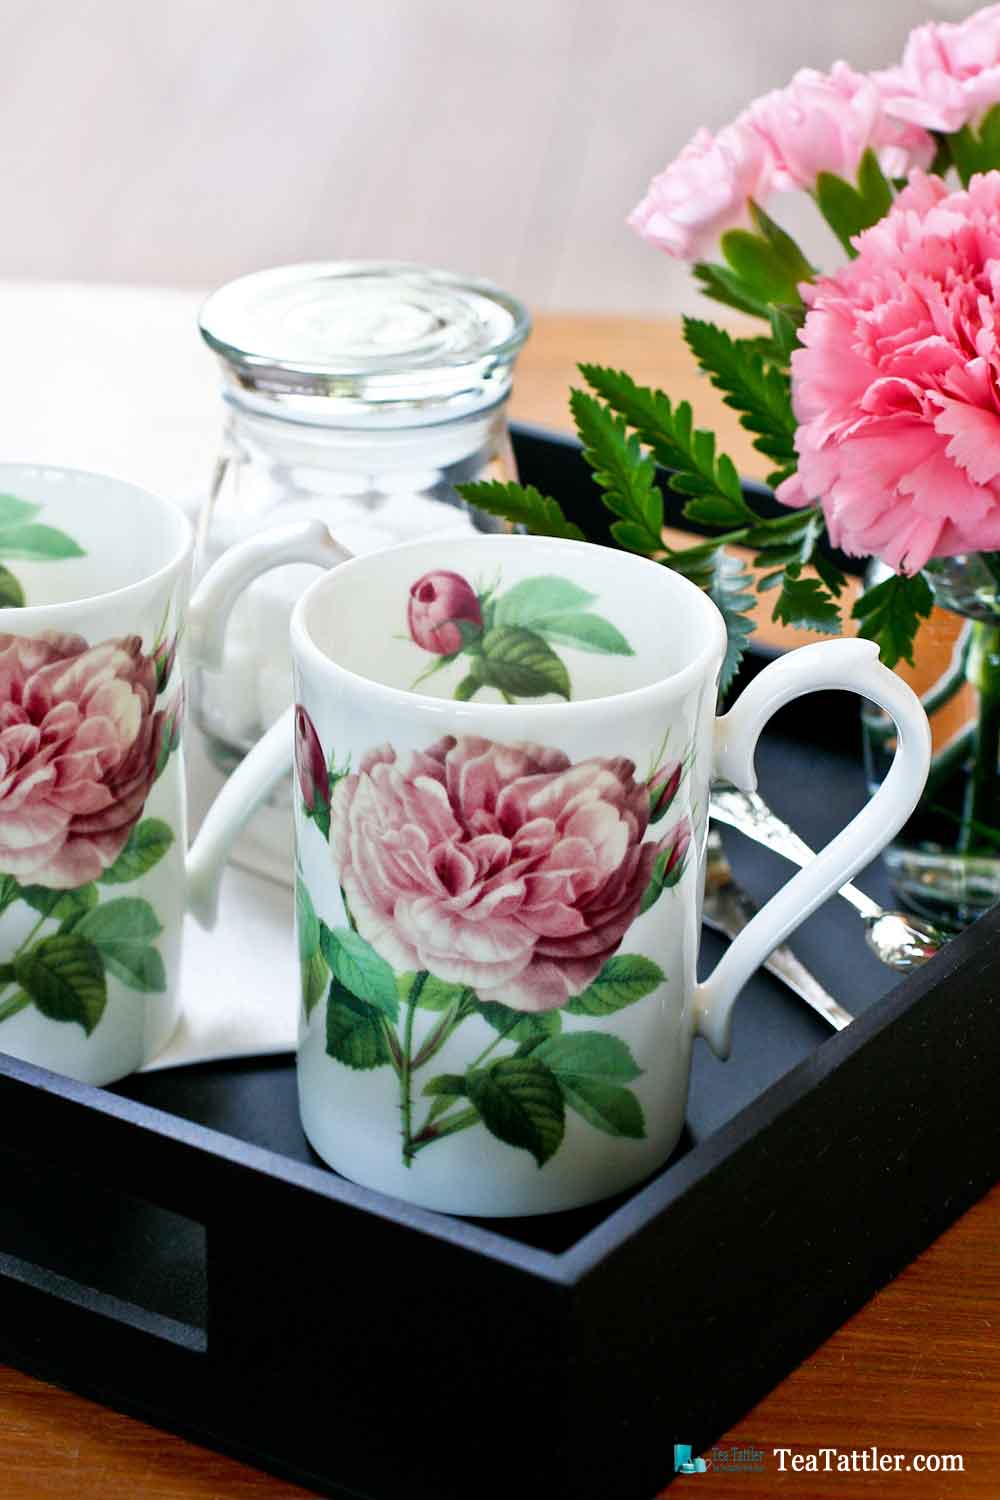 The Rose Collection - dainty and practical tea mugs by Roy Kirkham, England for a quick cuppa. Perfect for settling in with a good book. | TeaTattler.com #teamug